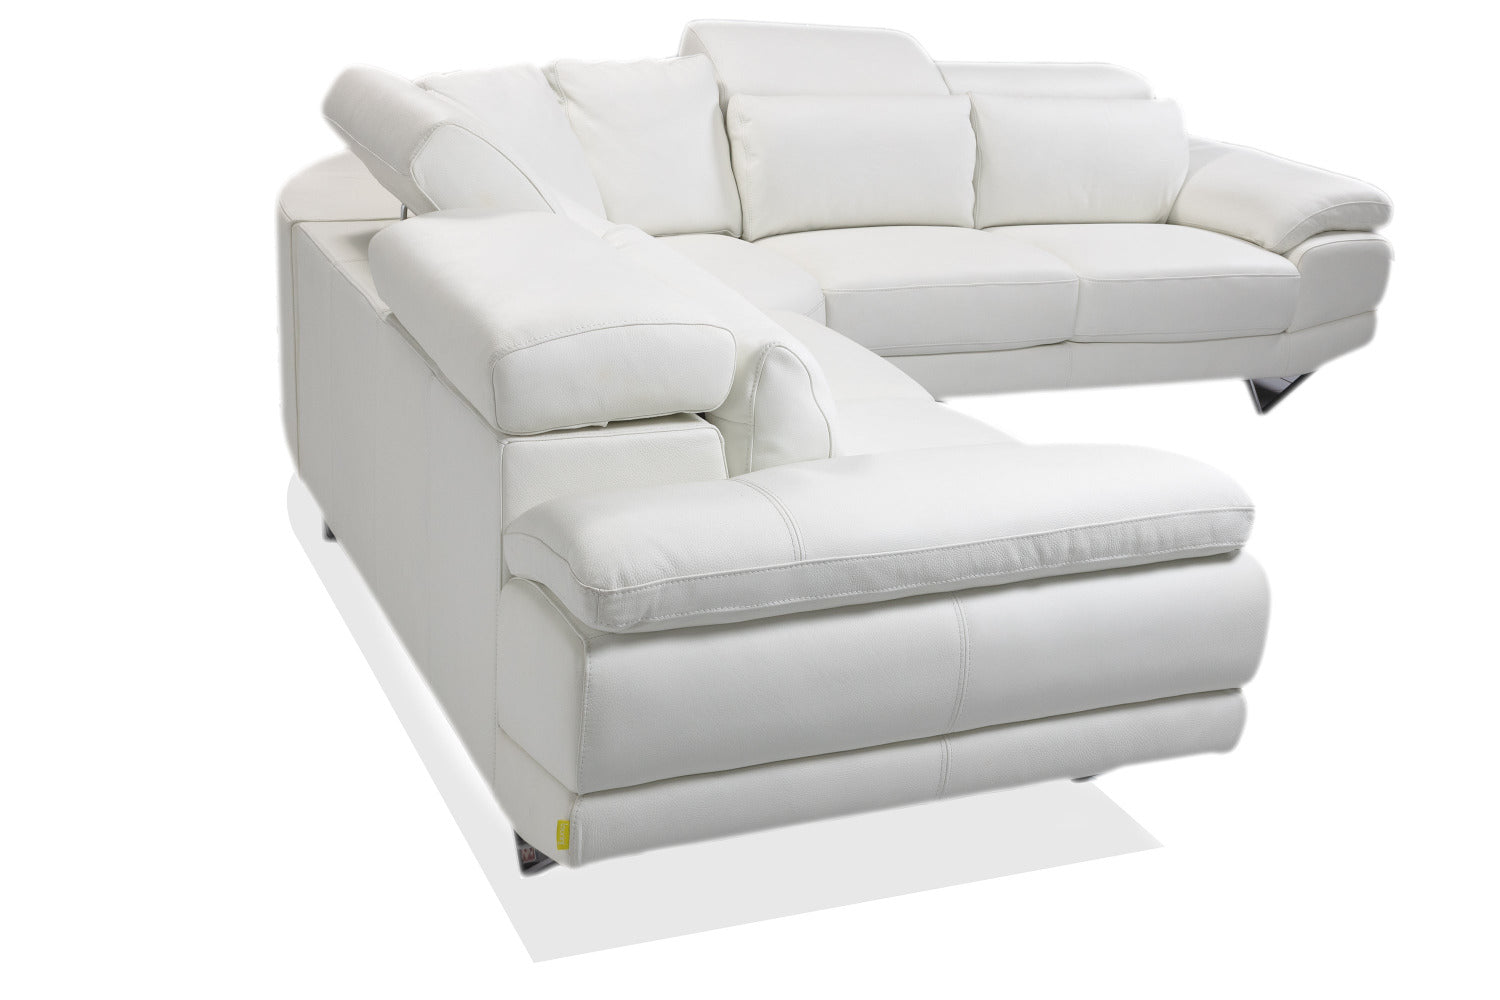 White leather corner couch handmade in Europe